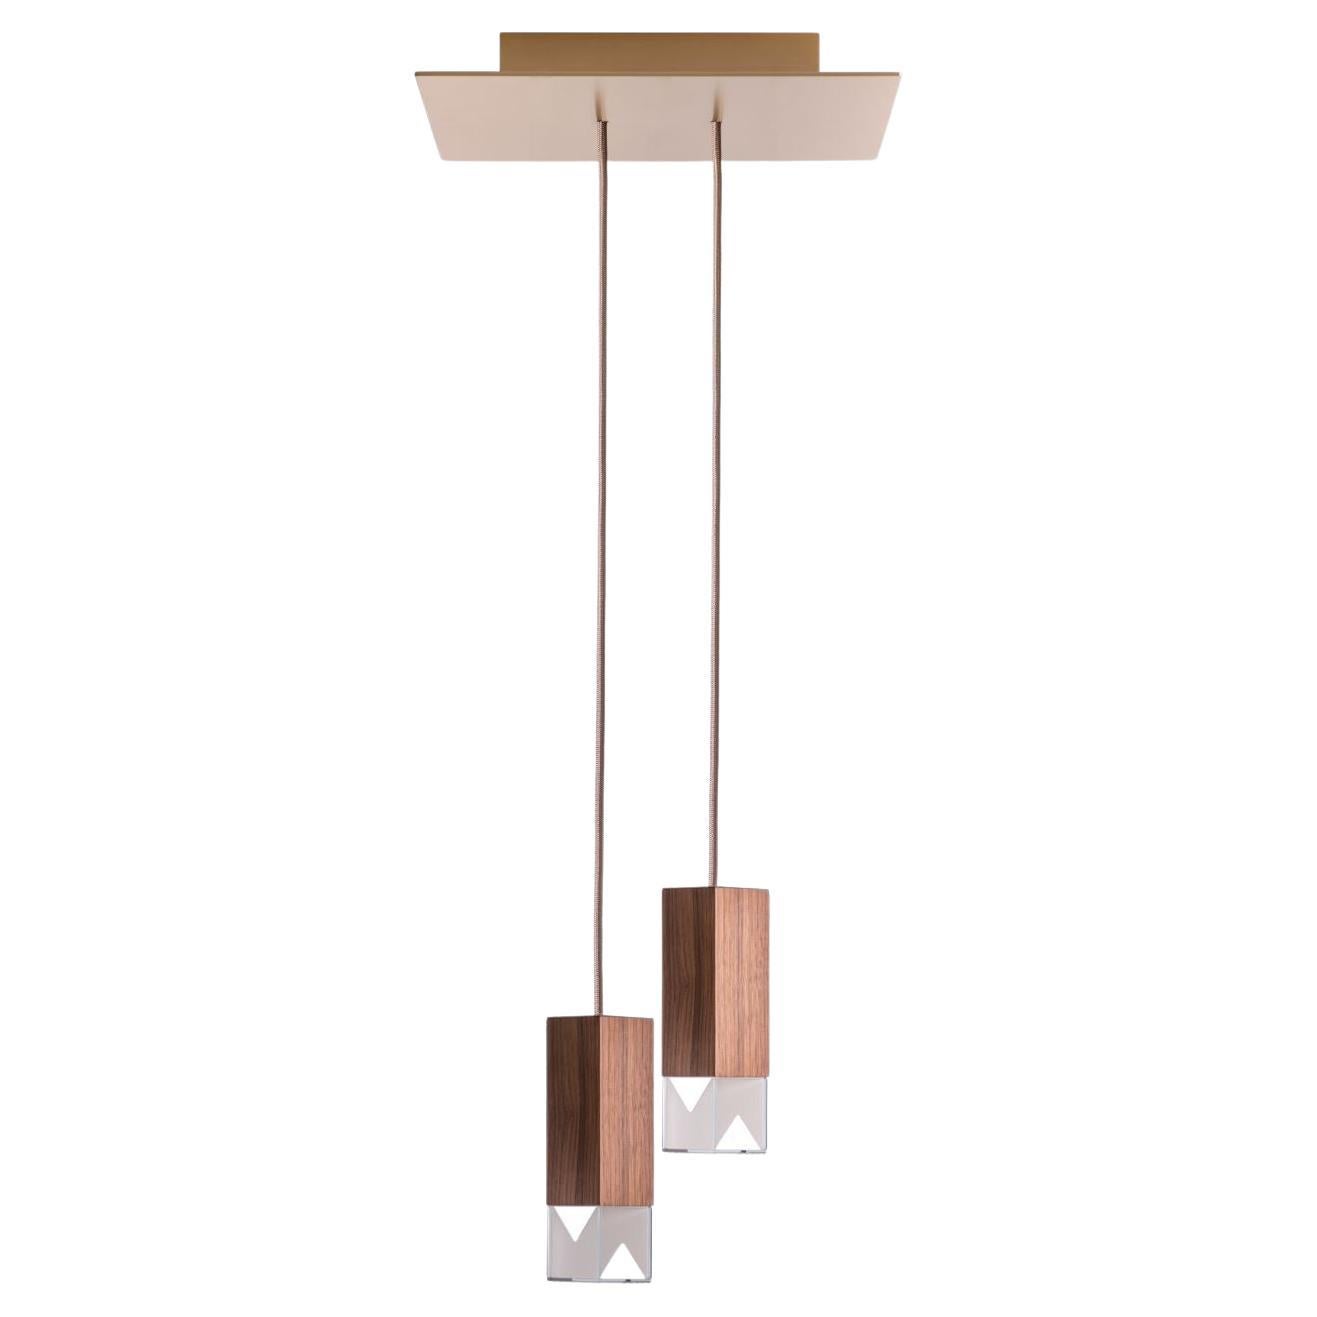 Lamp One Wood Duet Chandelier by Formaminima